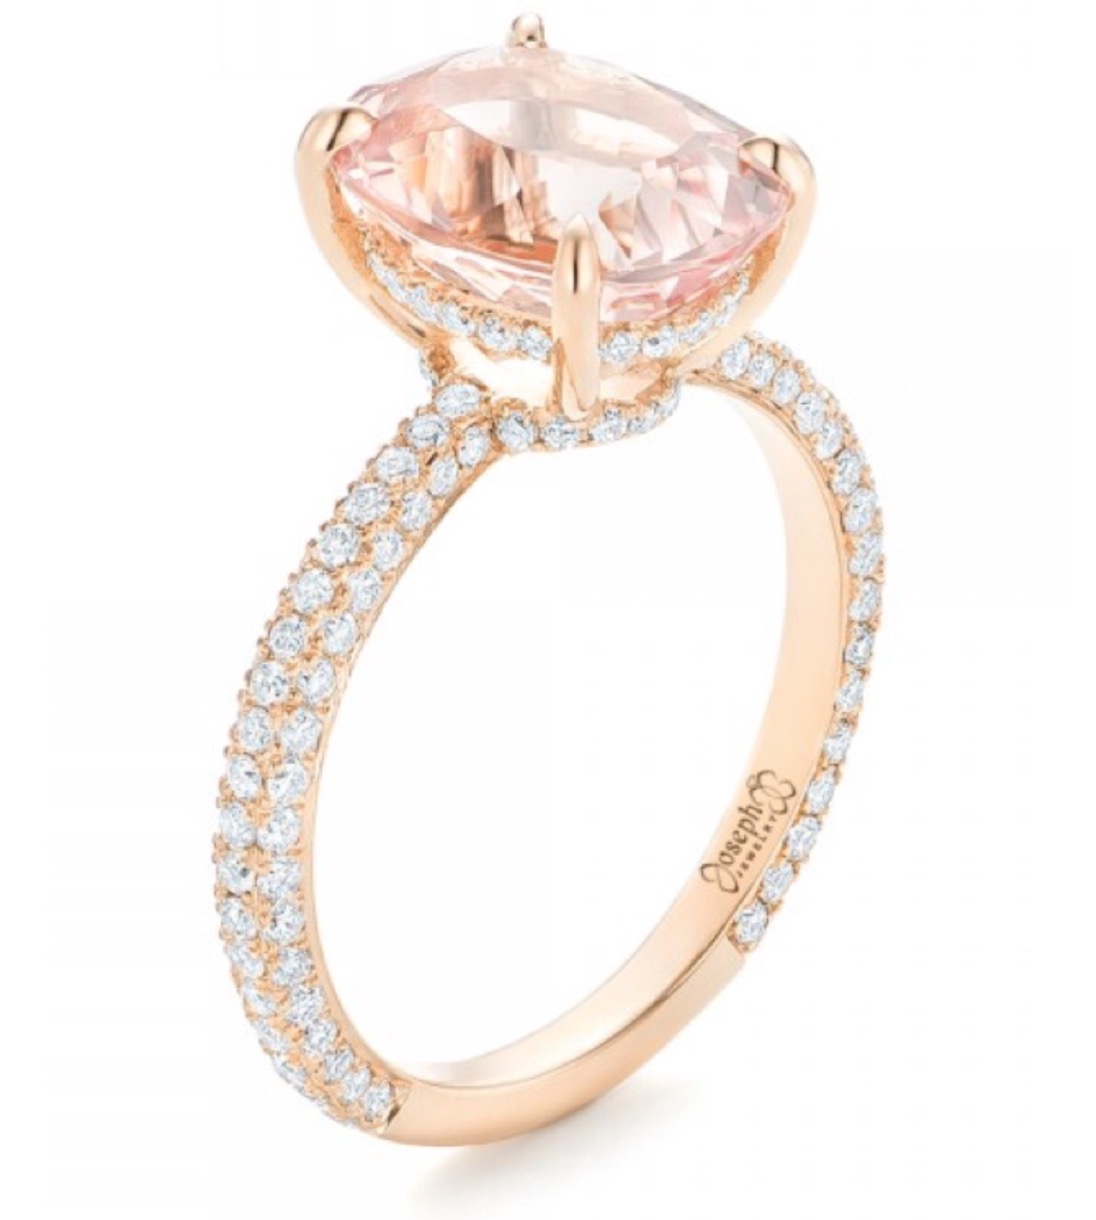 Gold engagement ring with pink center stone and diamonds all around the band. 